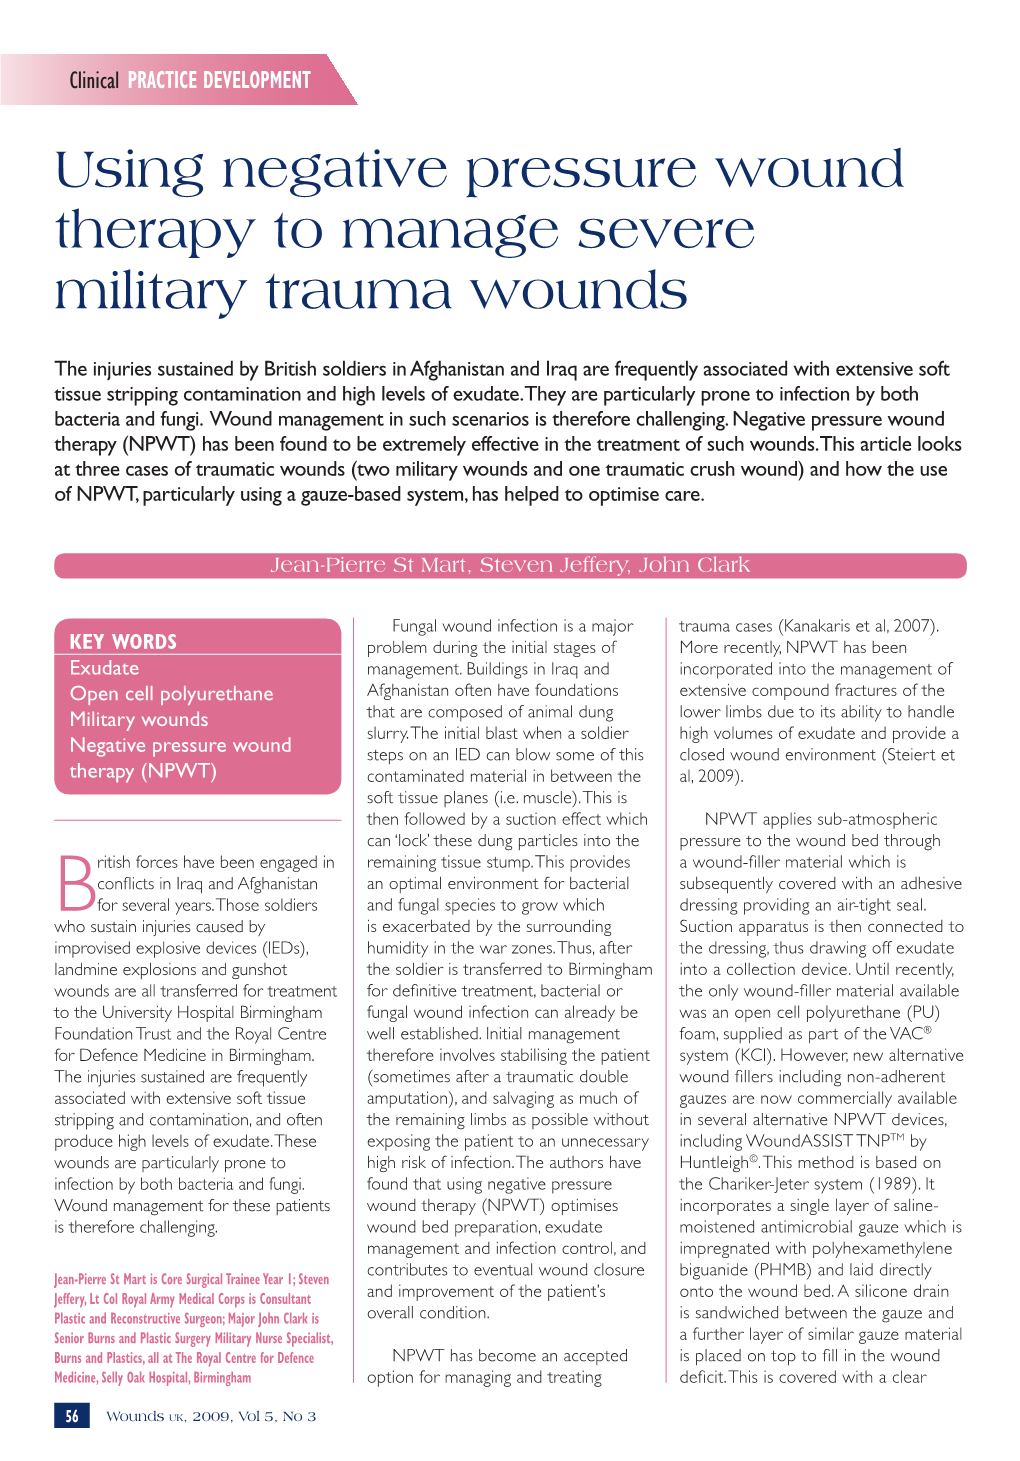 Using Negative Pressure Wound Therapy to Manage Severe Military Trauma Wounds